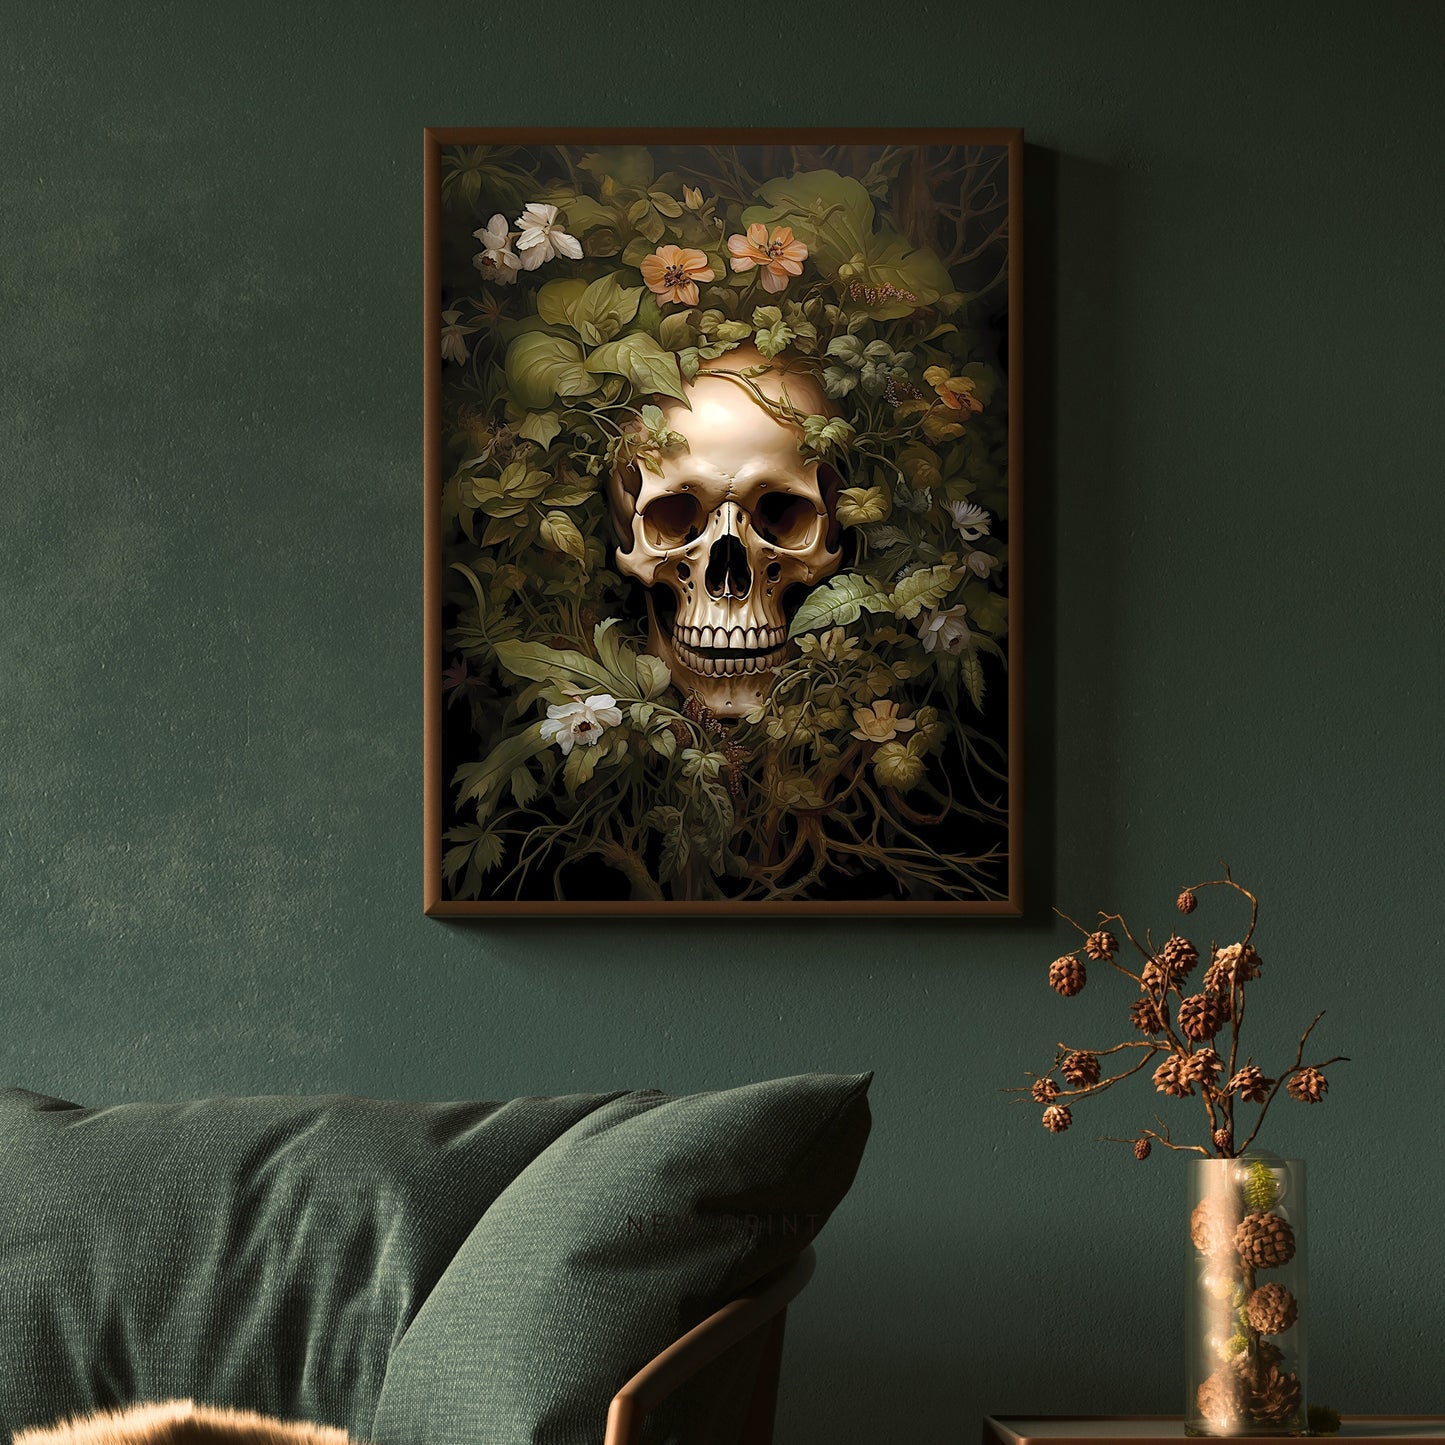 Skull and Flowers Paper Poster Prints Wall Art Dark Cottagecore Dark Academia Gothic Botanical Moody Goth Decor Dark Room Wall Decoration Witchy Art